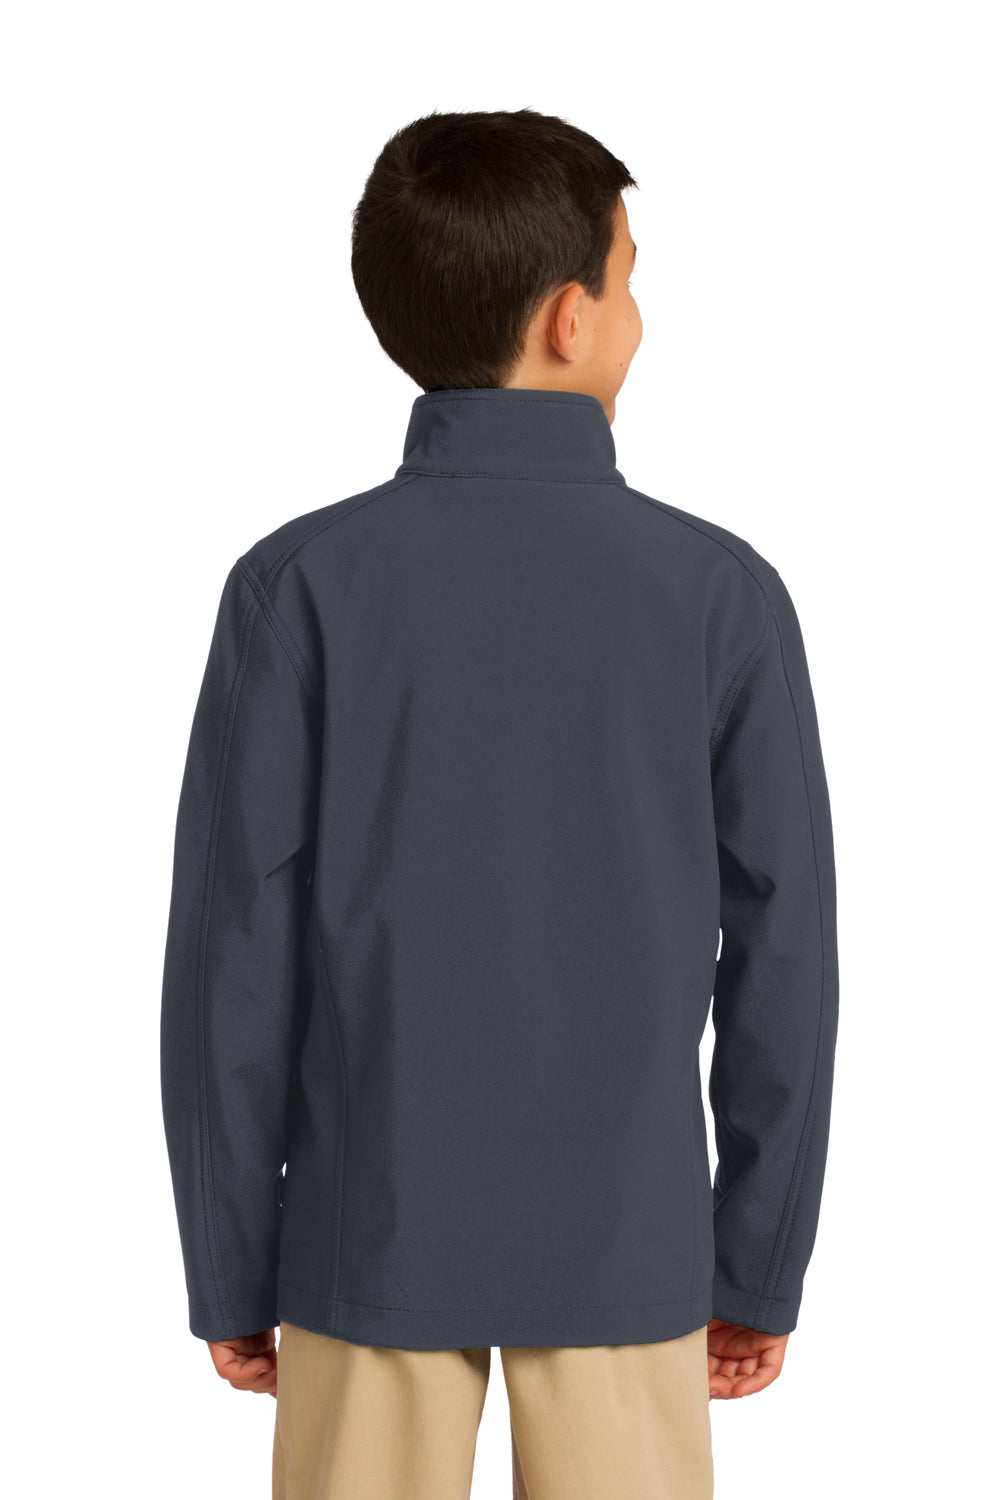 Port Authority Y317 Youth Core Wind & Water Resistant Full Zip Jacket Battleship Grey Back